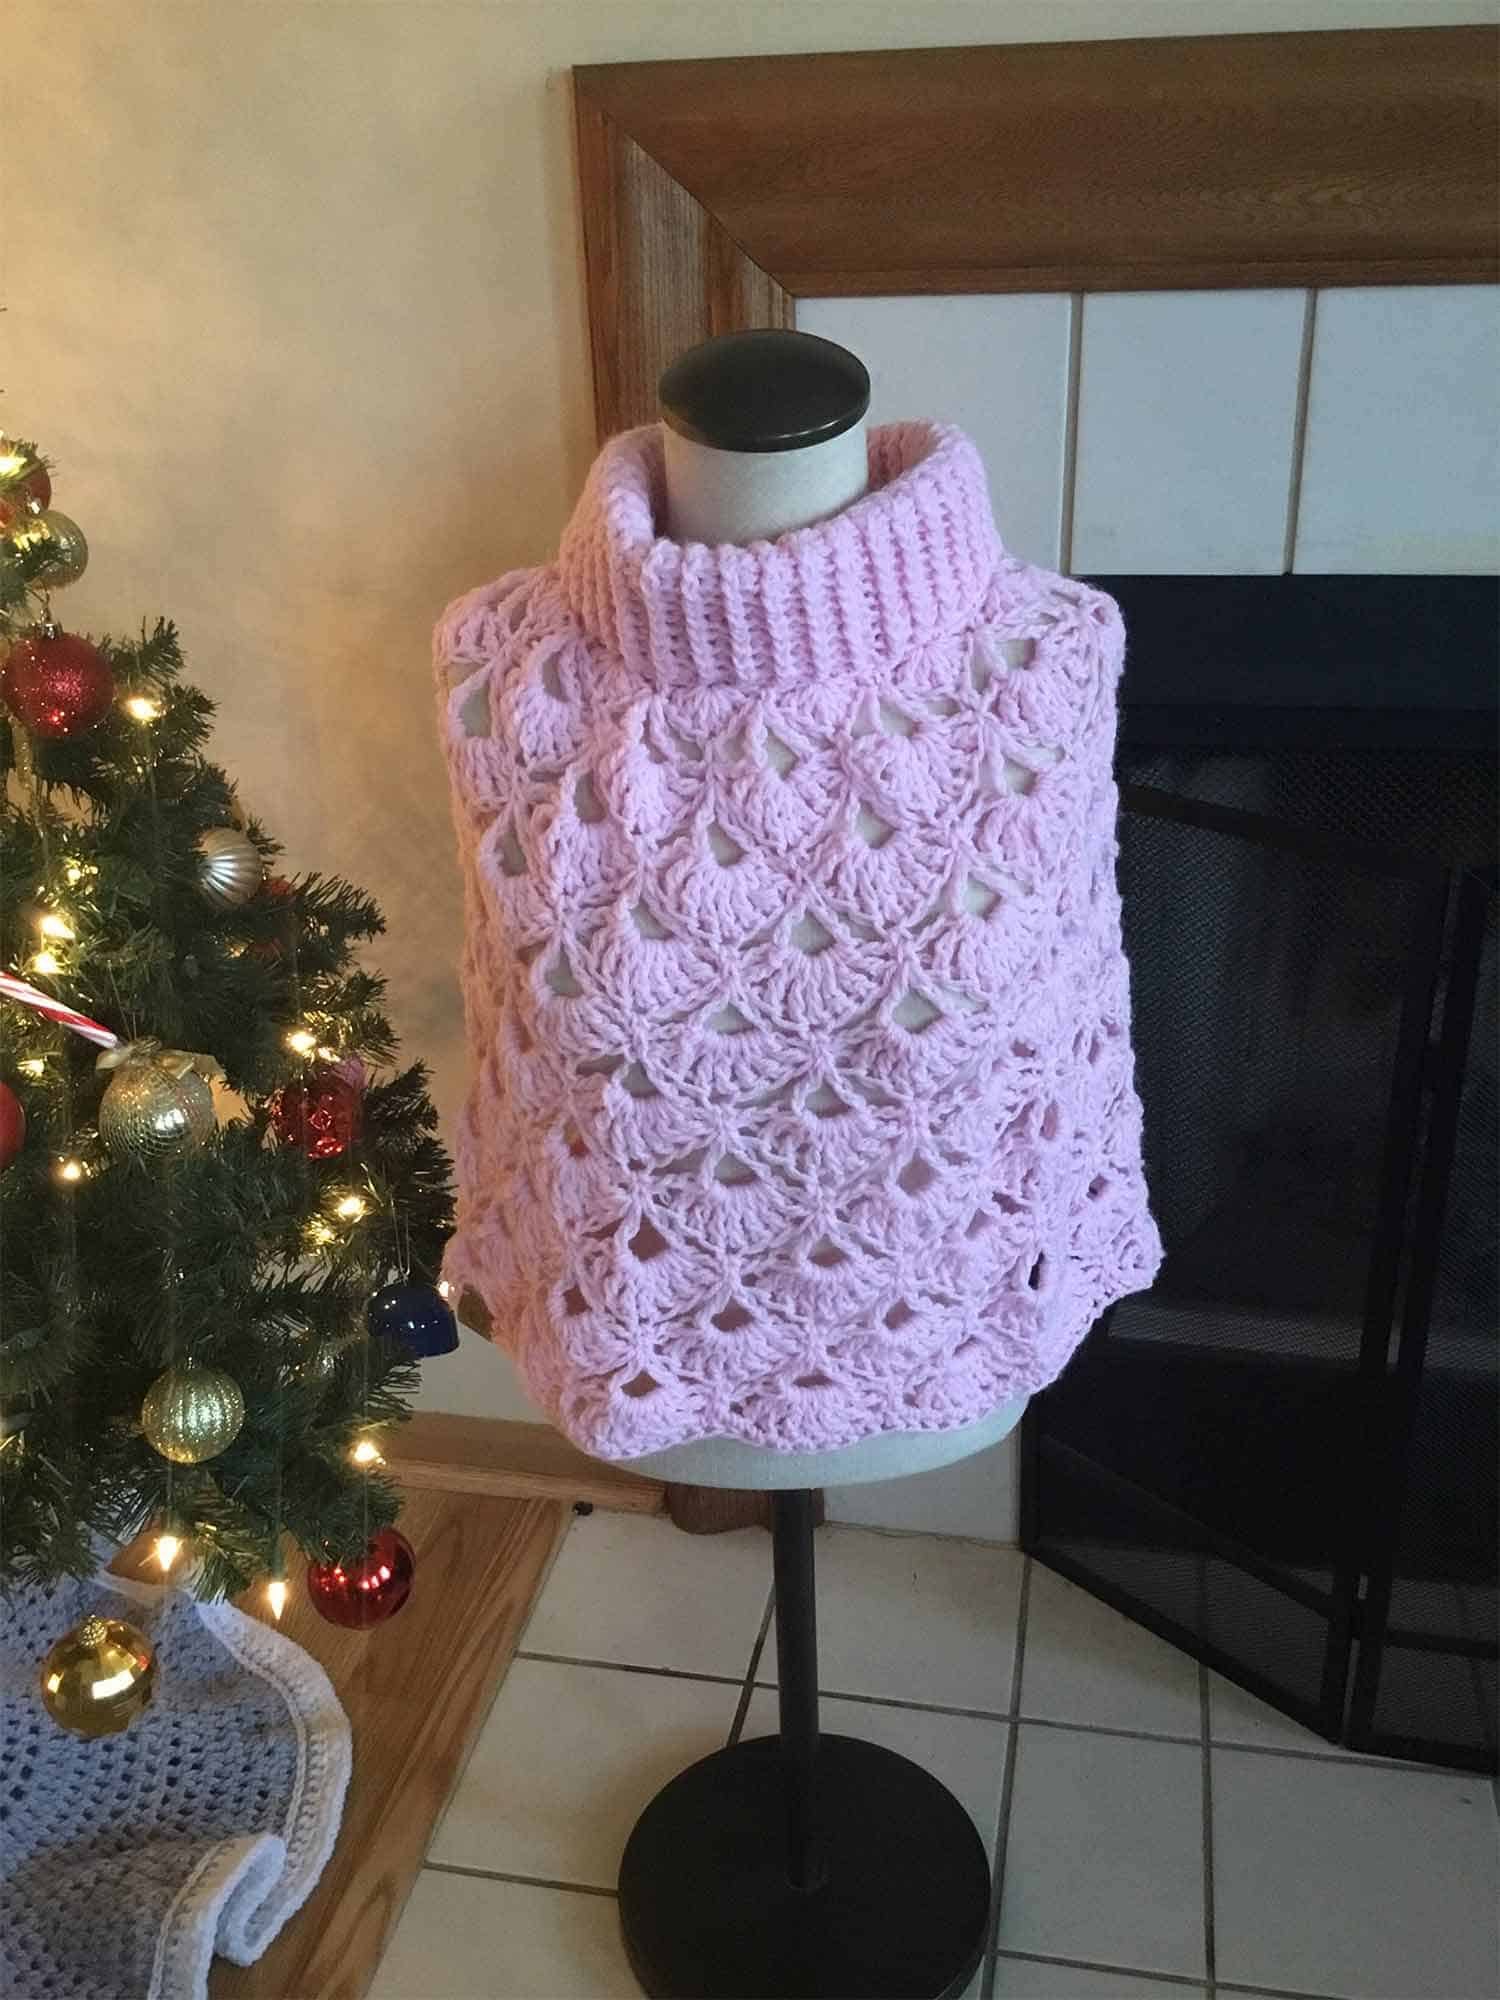 This Classy Pink Neck Cowl is made with love by Classy Crafty Wife! Shop more unique gift ideas today with Spots Initiatives, the best way to support creators.